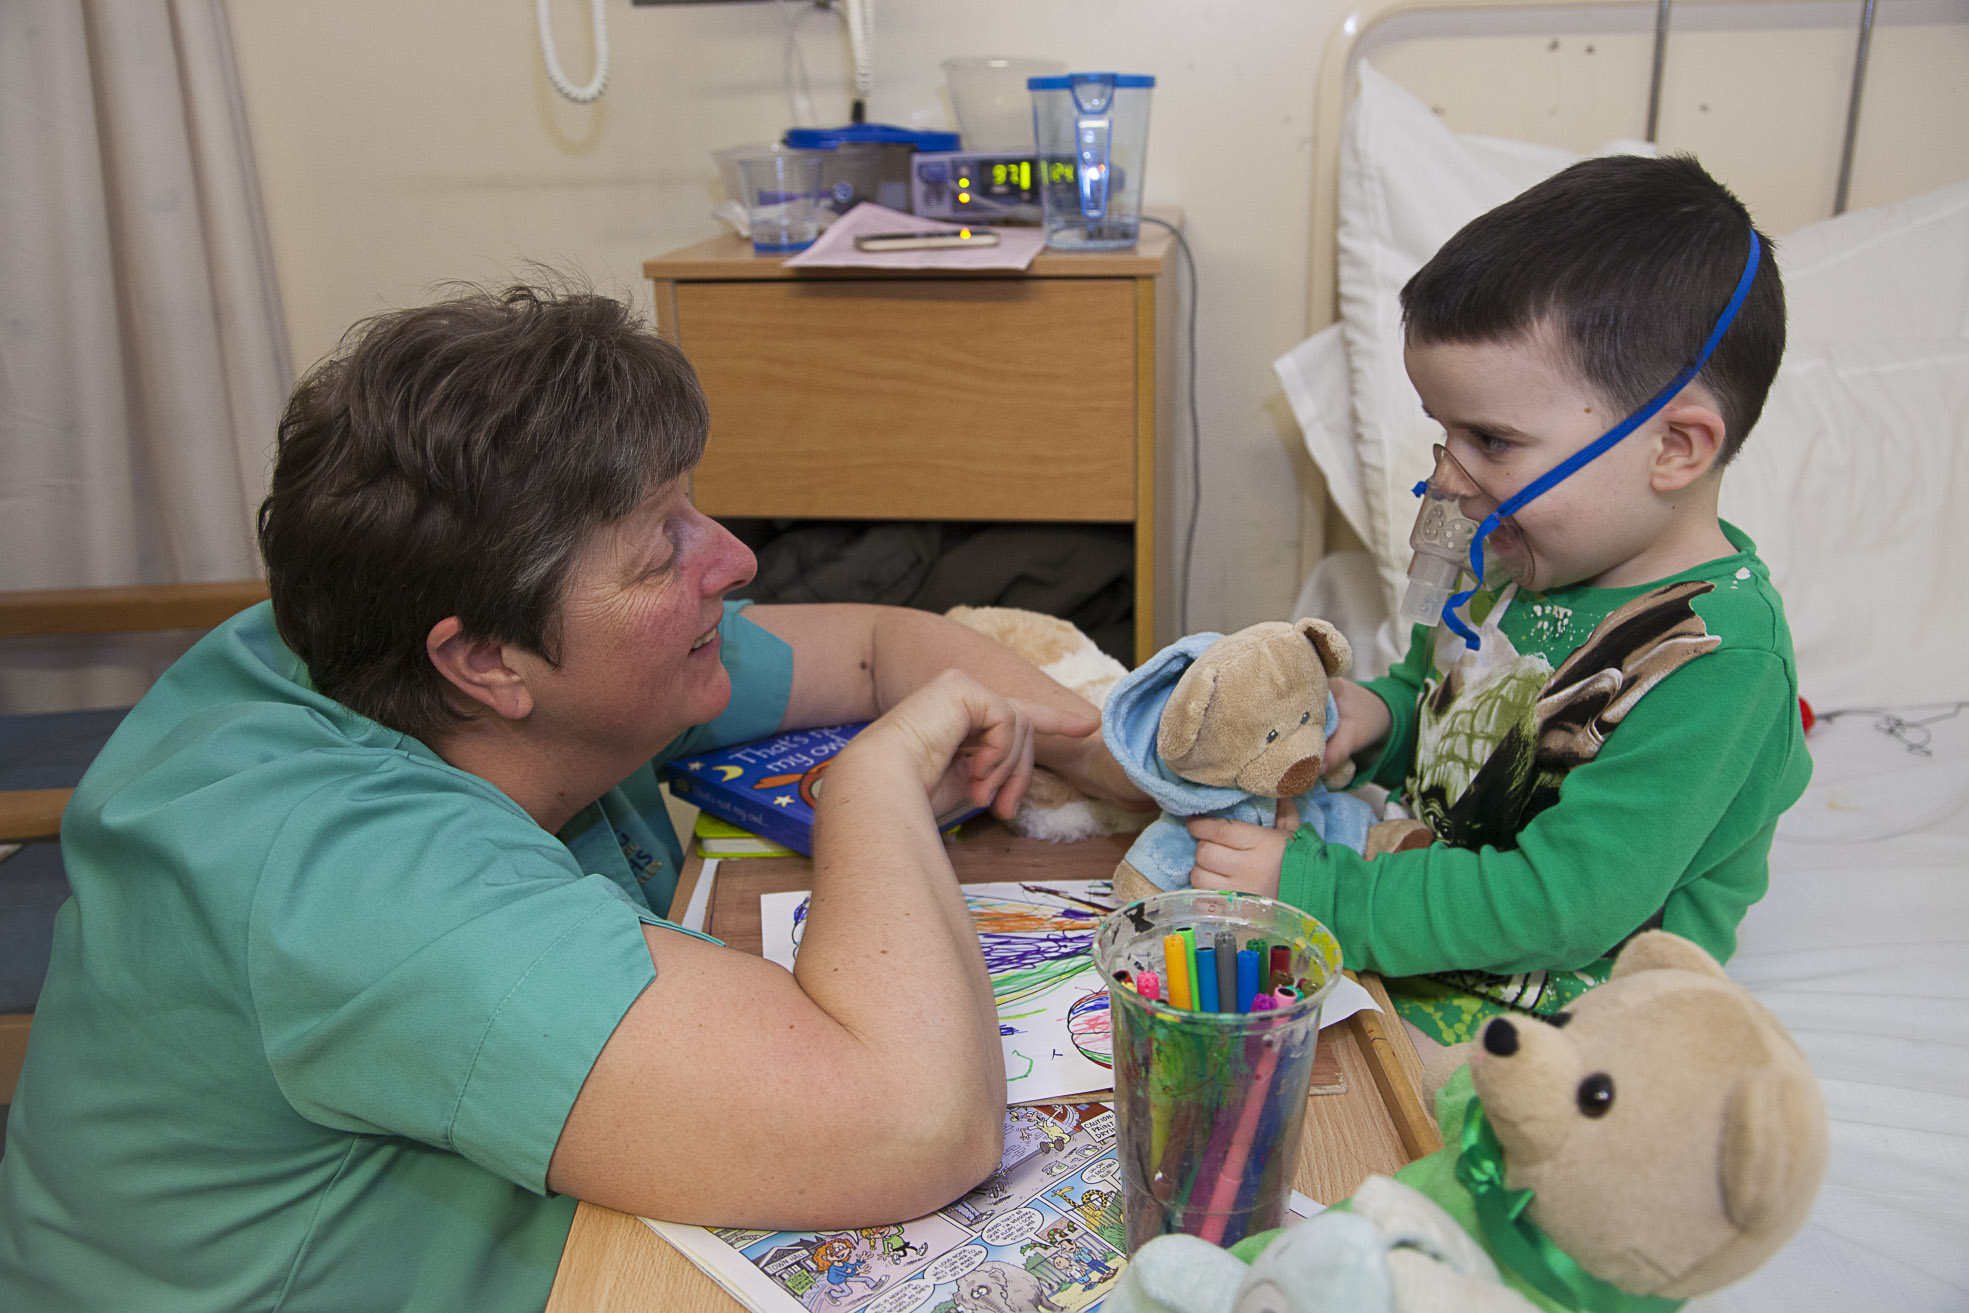 Young patients get creative at Ysbyty Gwynedd thanks to bedside play scheme